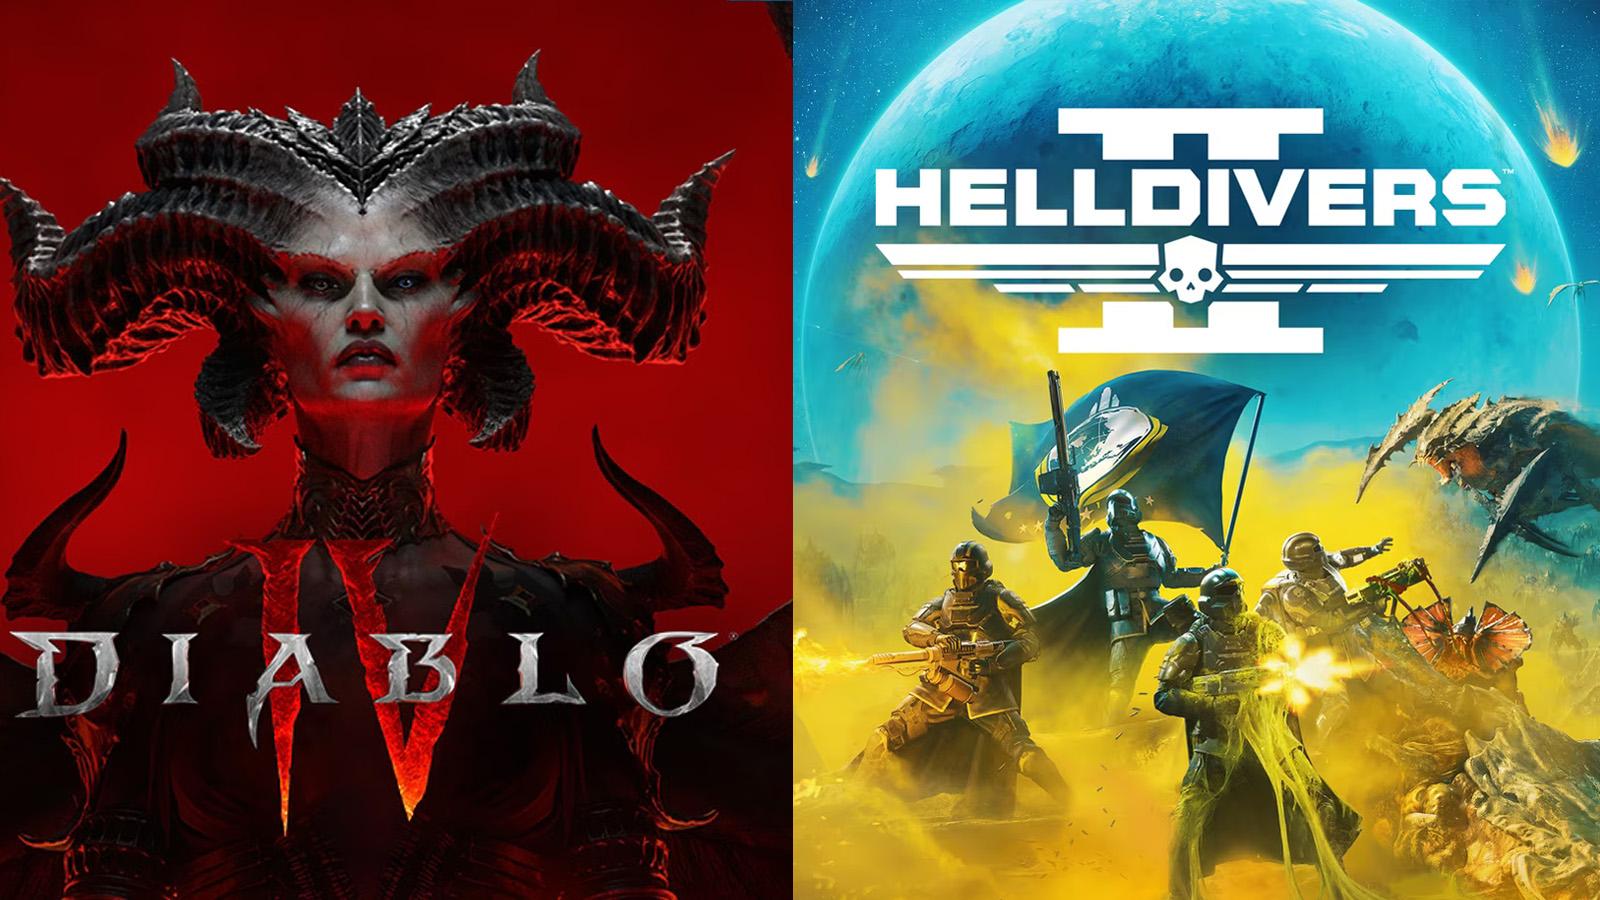 Promotional art for Diablo 4 and Helldivers 2 side by side